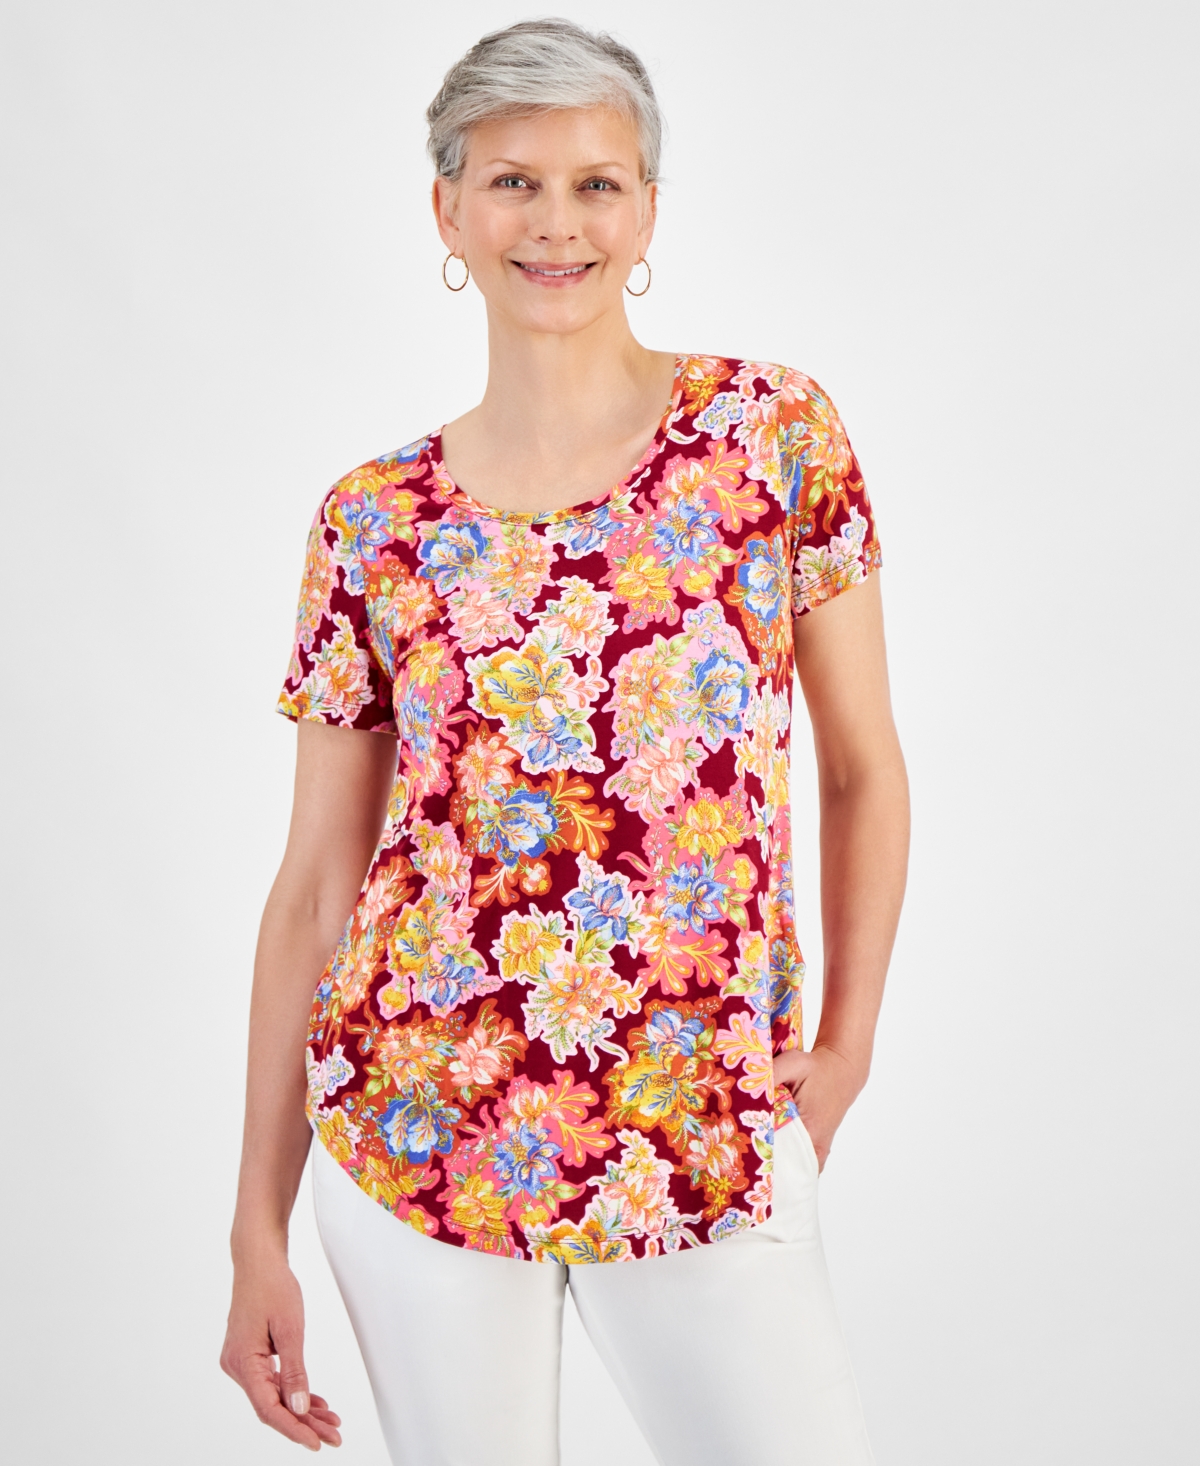 Women's Scoop-Neck Short-Sleeve Printed Knit Top, Created for Macy's - Ruby Slippers Combo